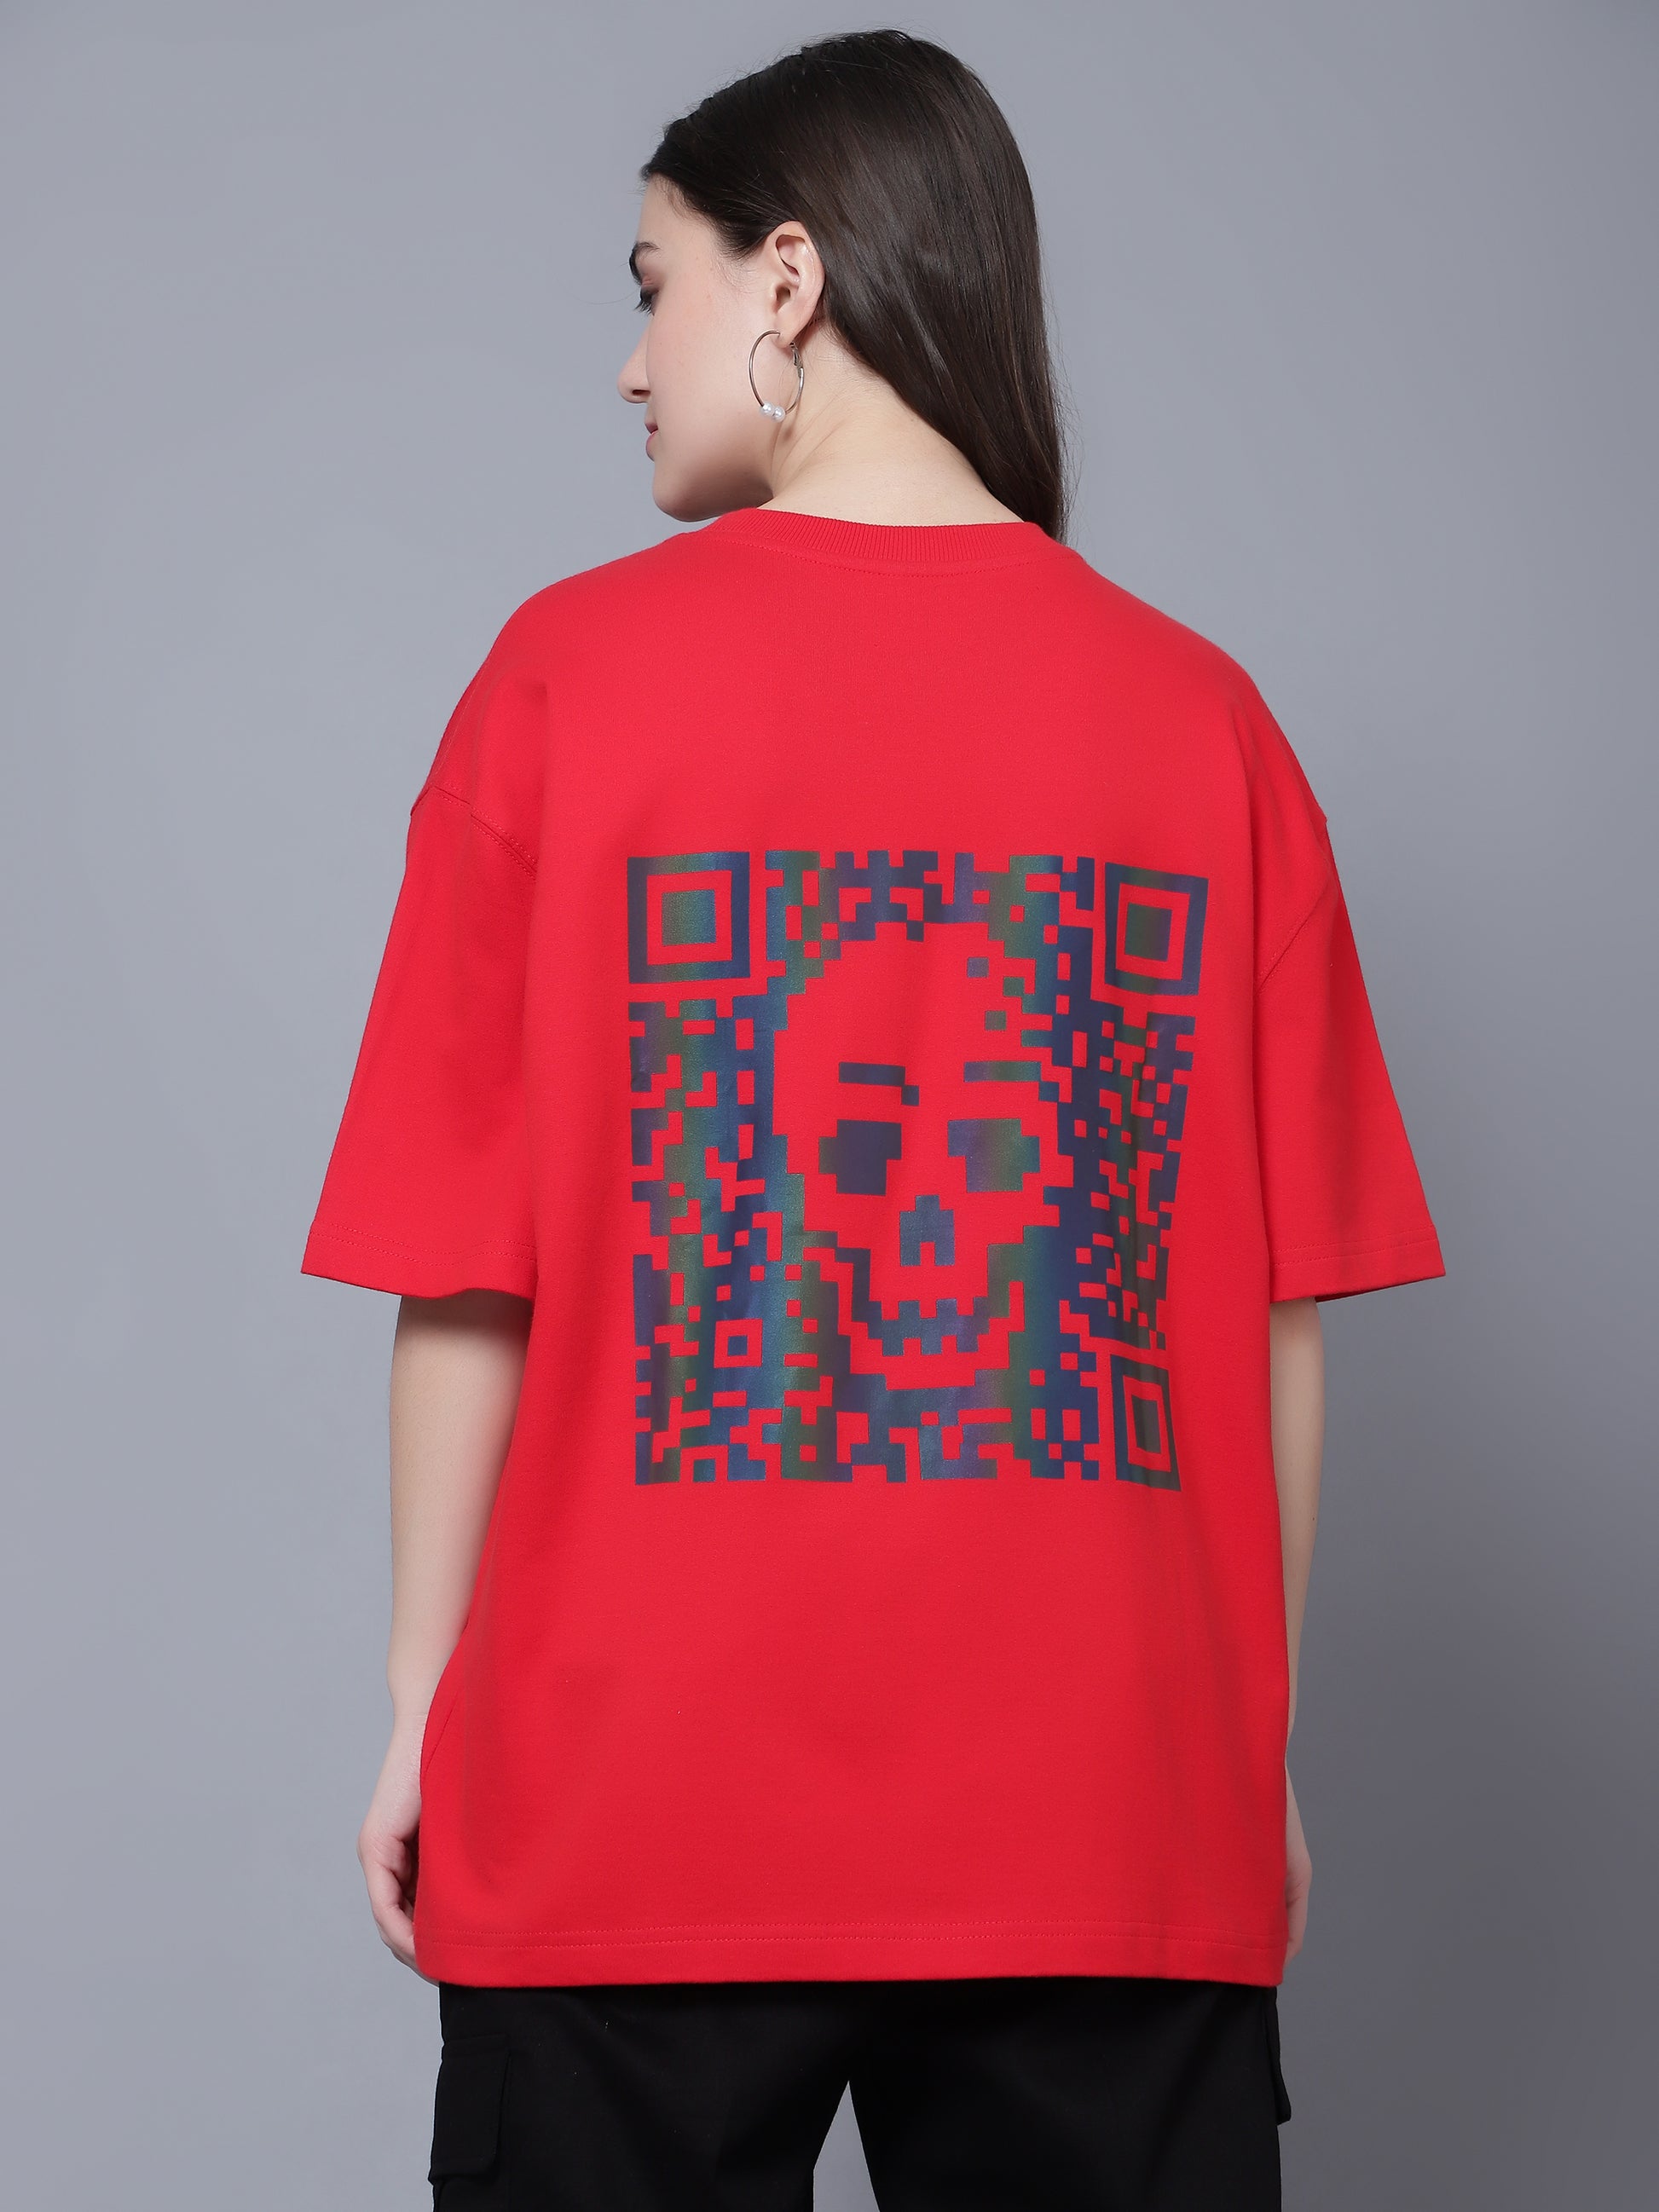 Skull Scanner Rainbow Reflector Over-Sized T-Shirt (Red) - Wearduds